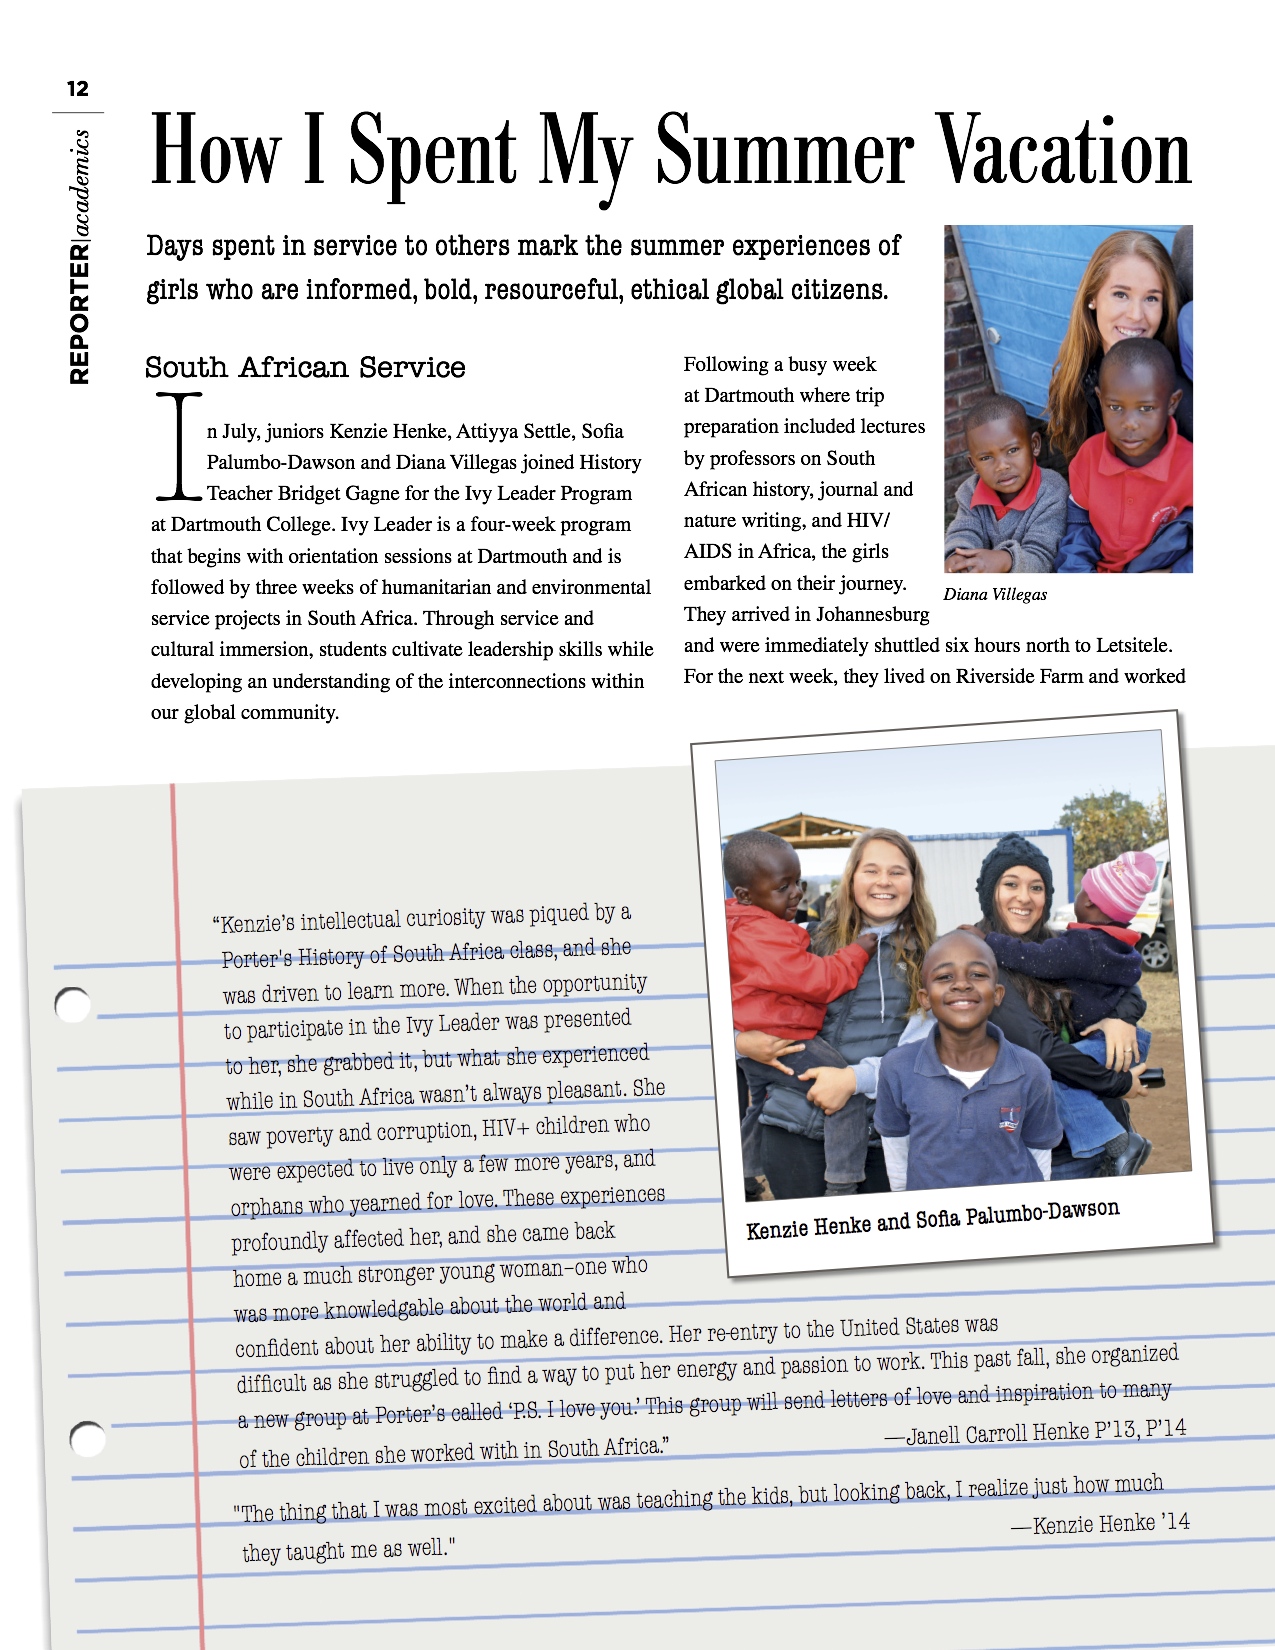 Ivy Leader, Students, and Faculty Featured in Miss Porter’s “Bulletin”